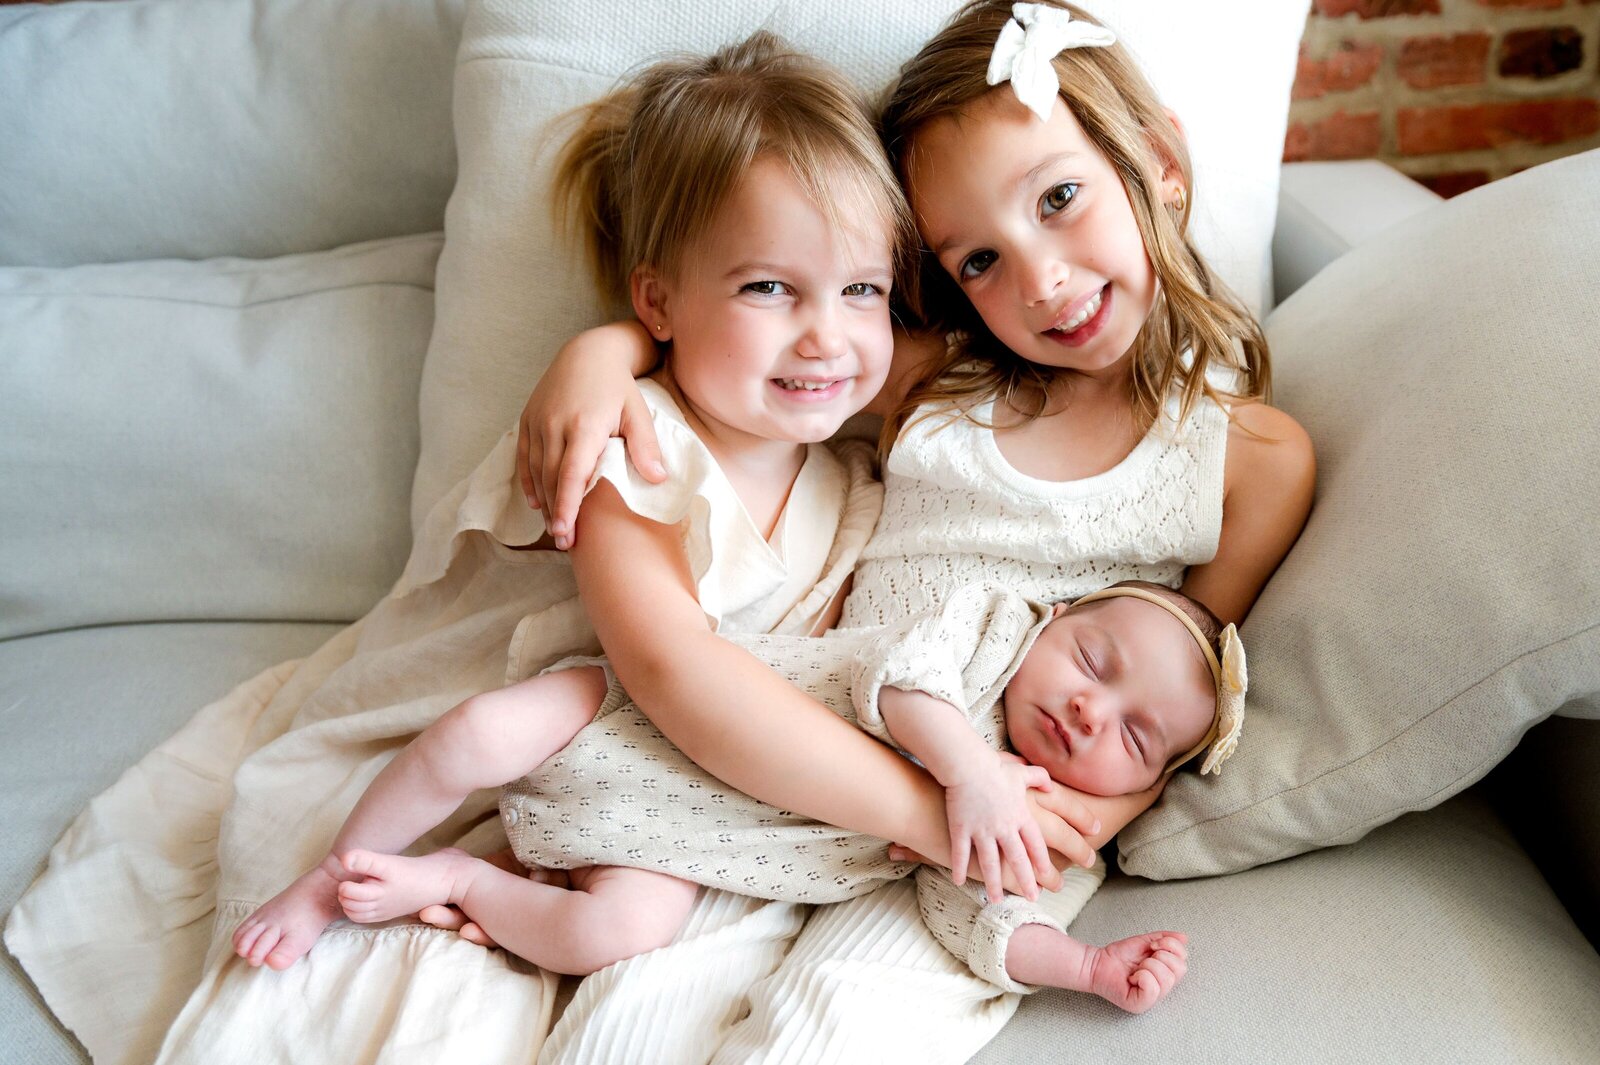 two girls dresssed in white dresses holding baby sister